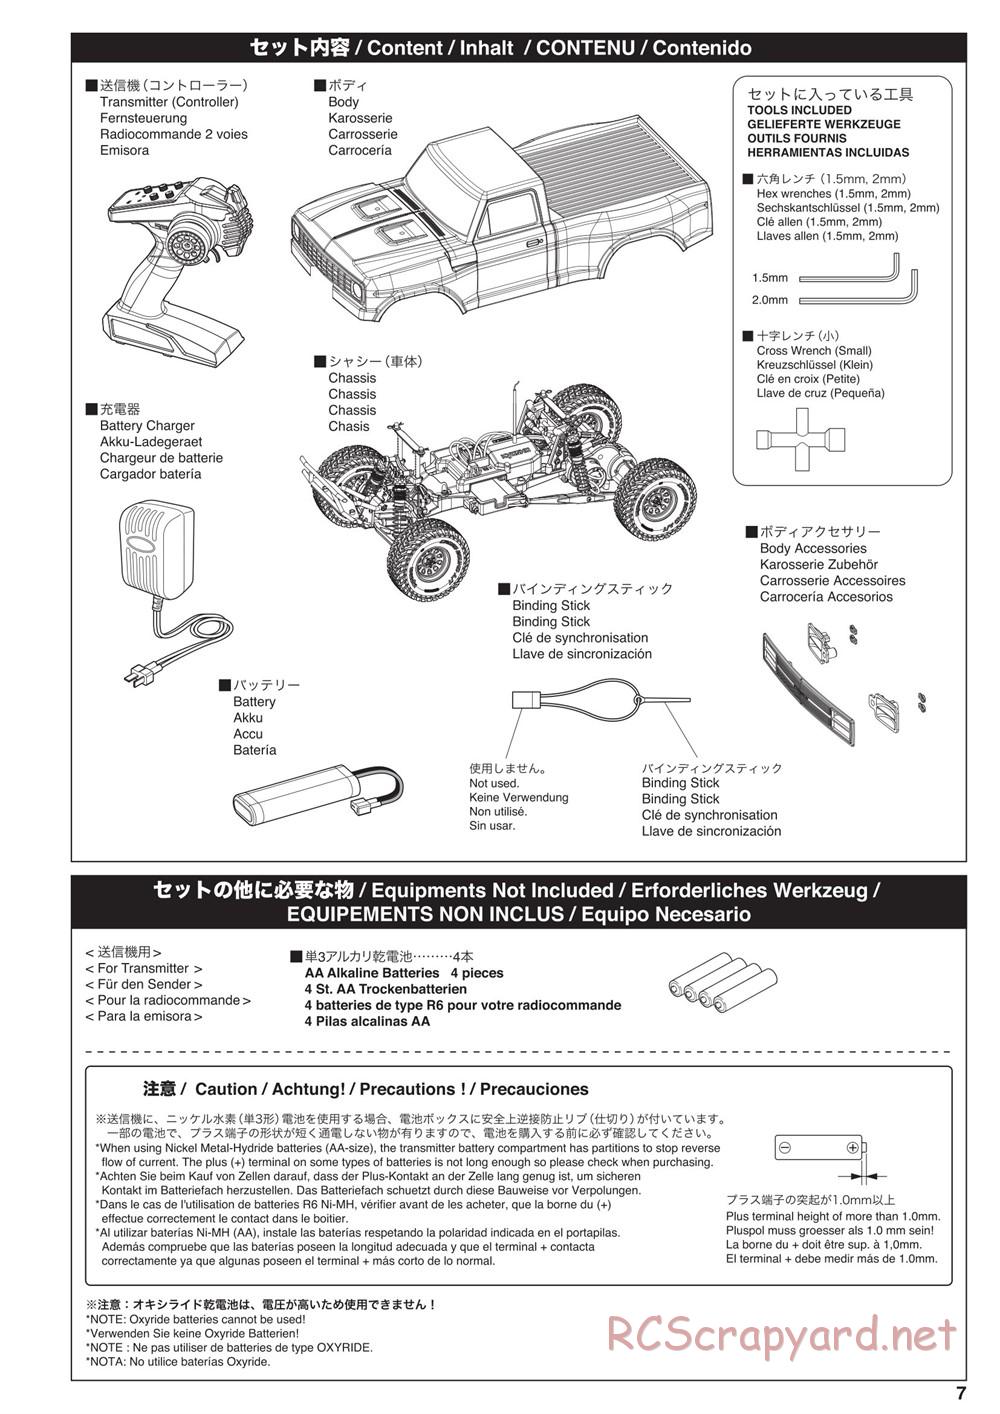 Kyosho - Outlaw Rampage - Manual - Page 7